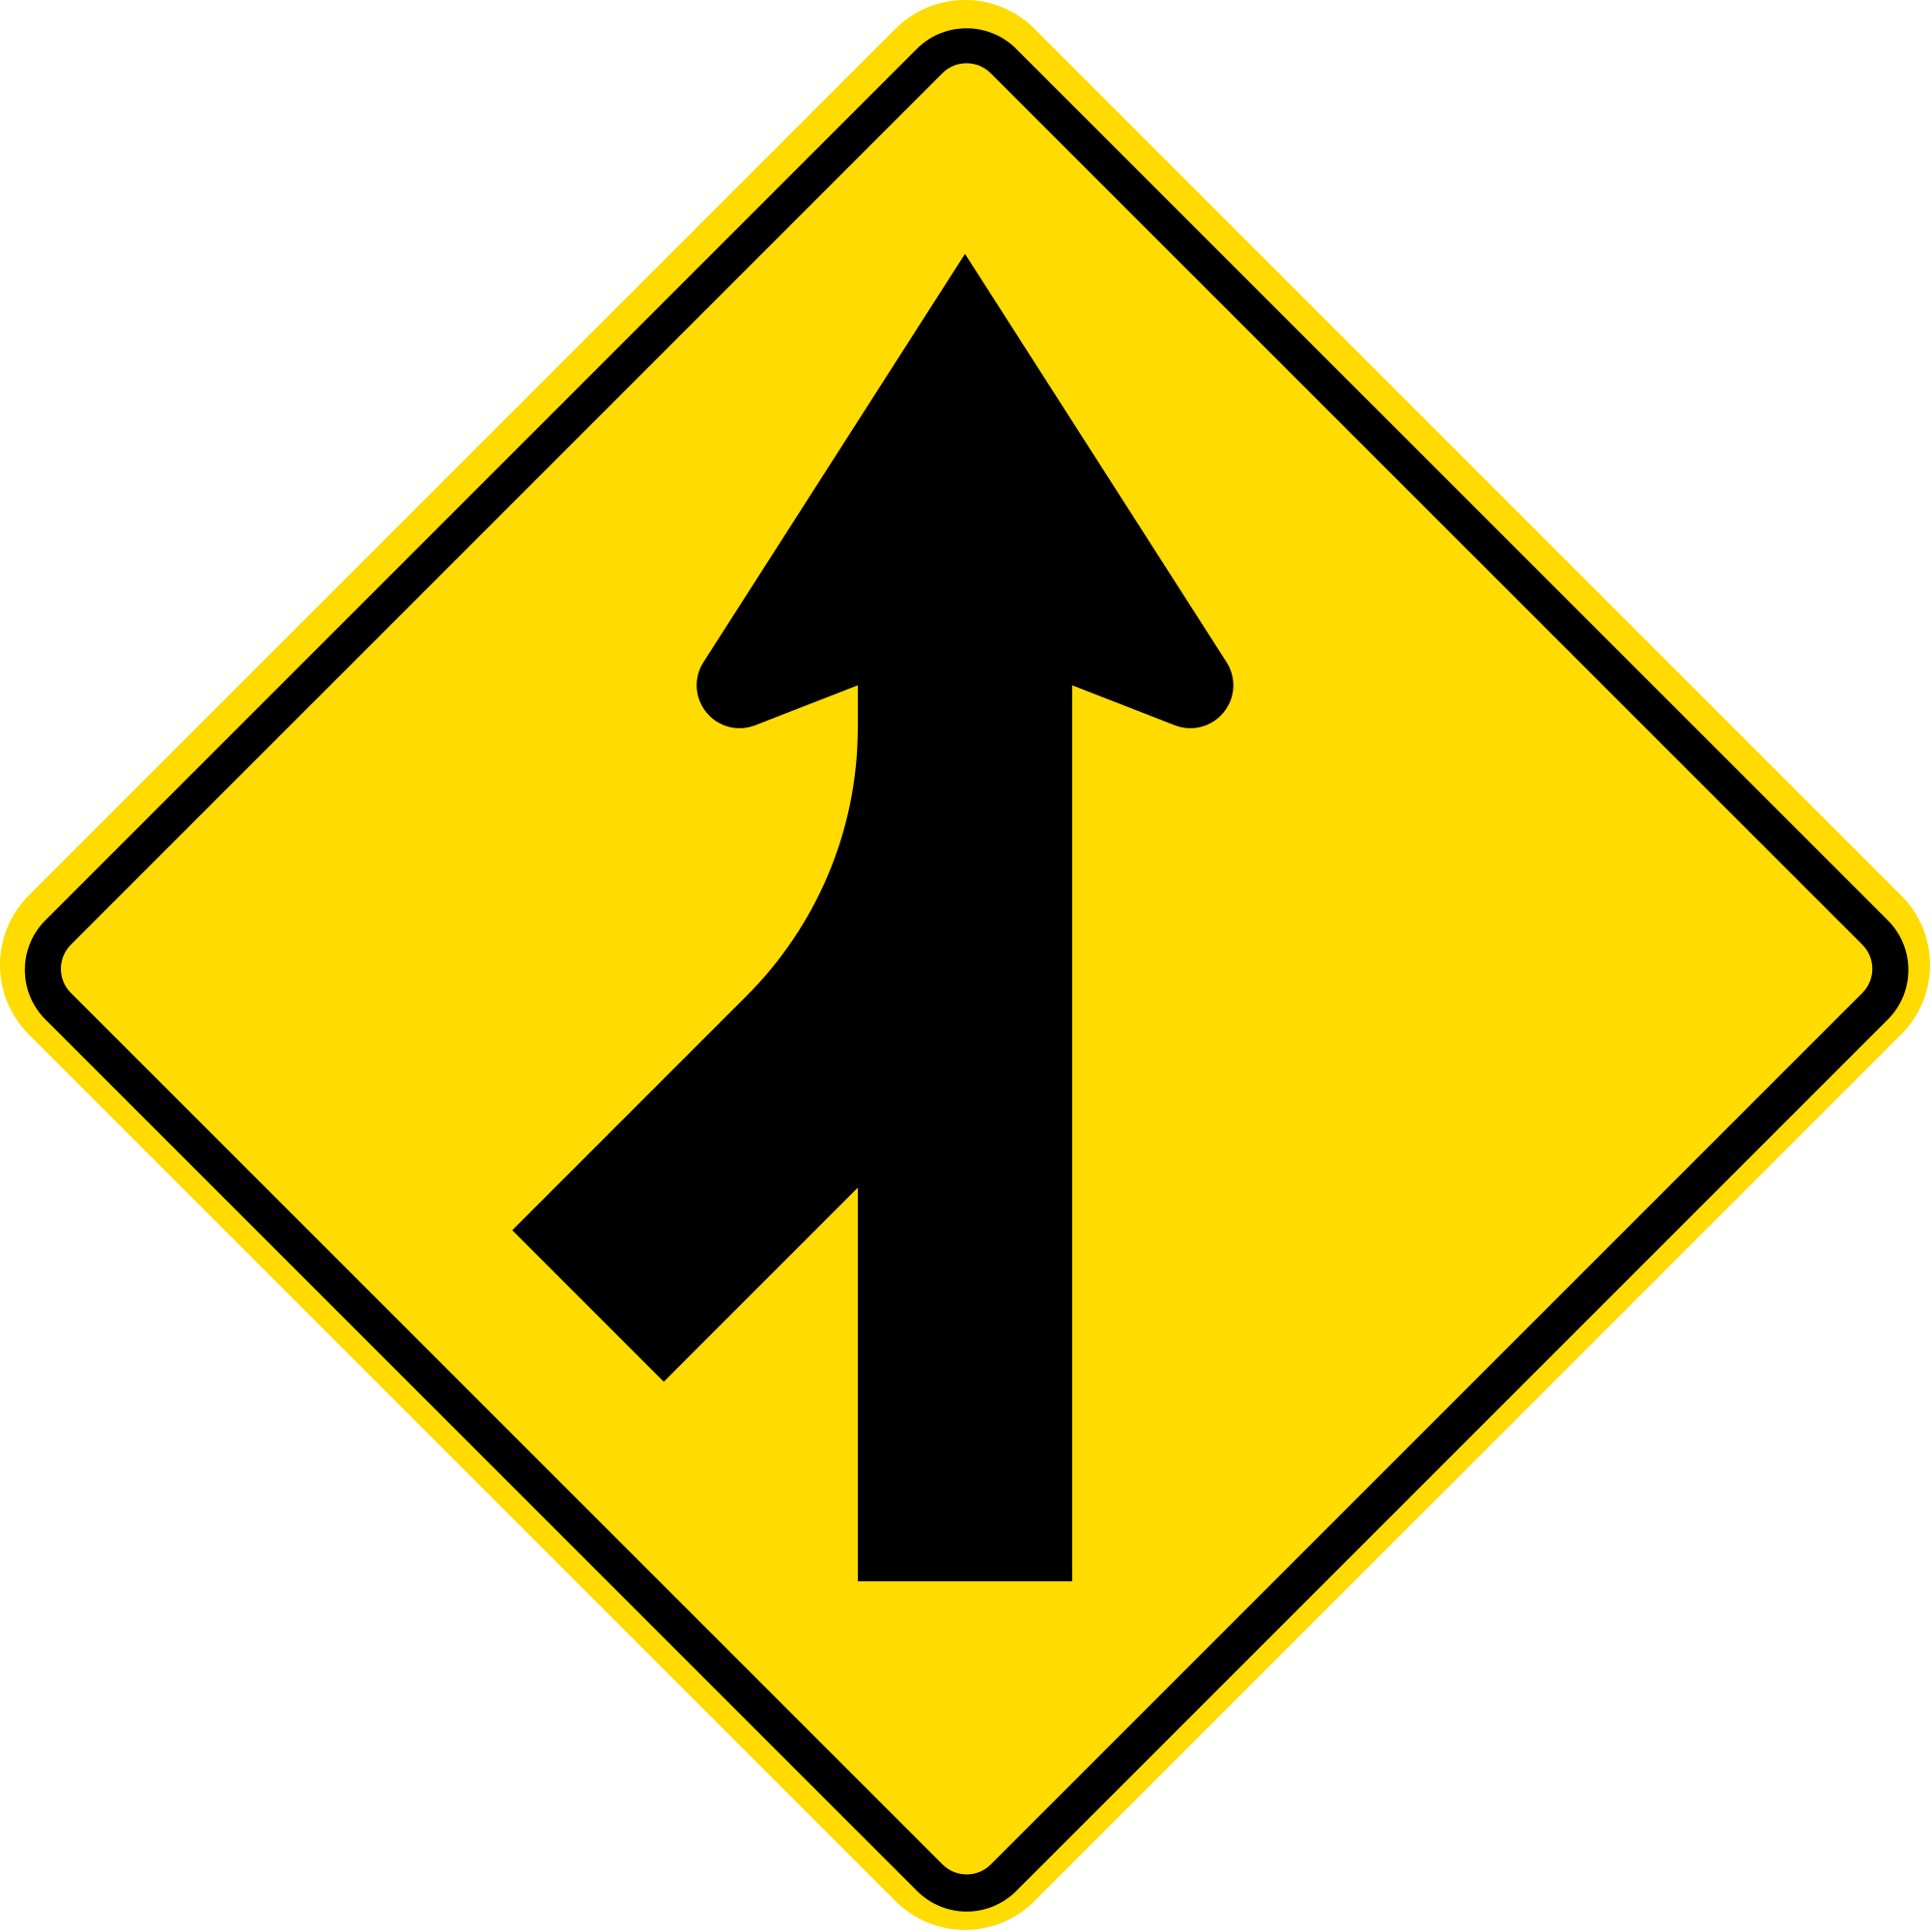 File:New Zealand road sign W11-6.1 L.svg - Wikimedia Commons